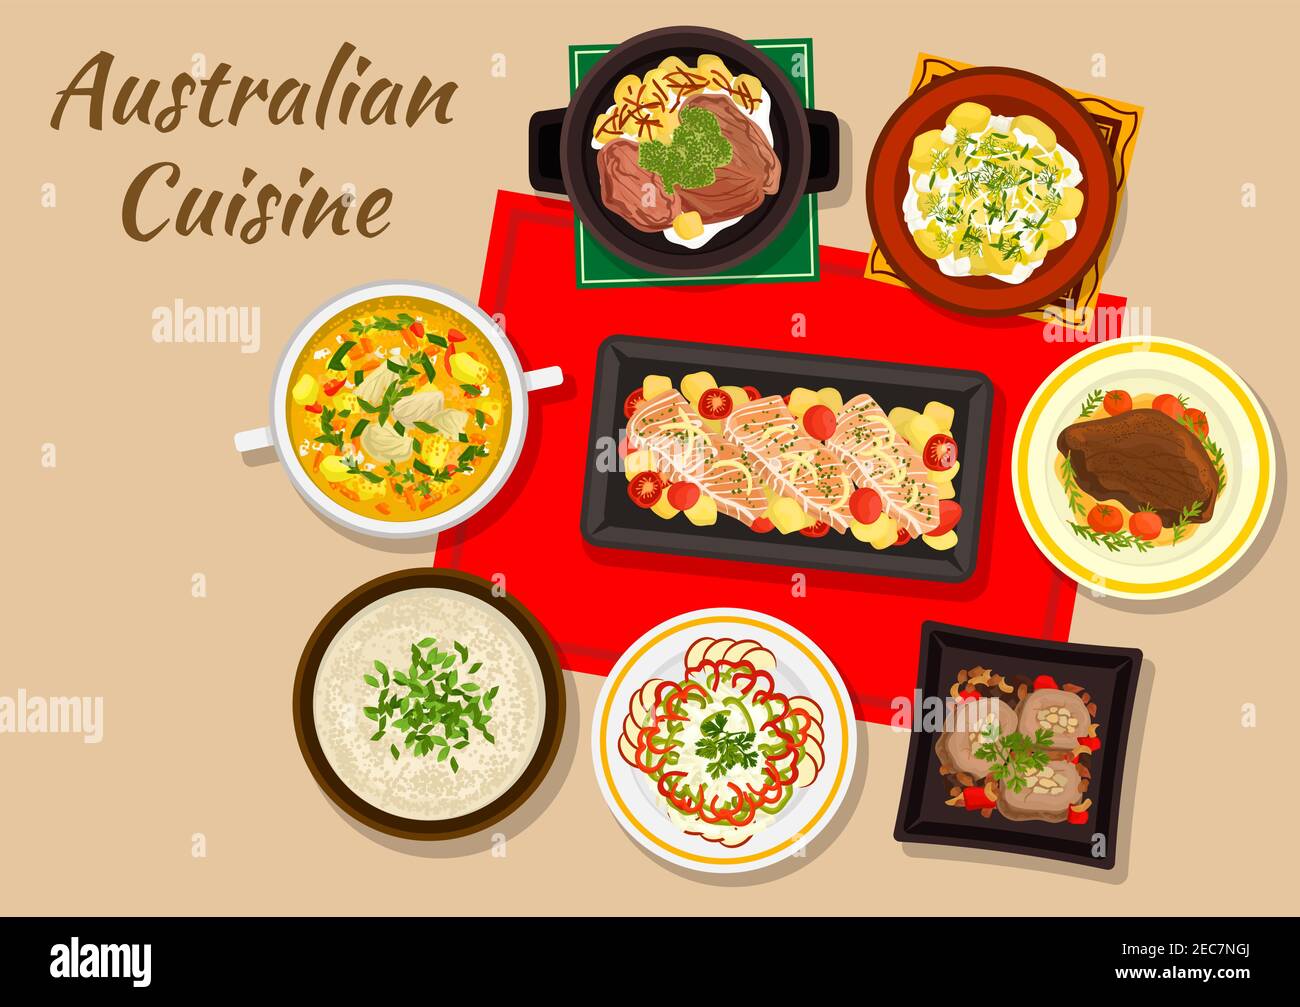 Australian cuisine dinner icon with baked salmon, beef steak, chicken cream soup with almond, beef rolls with nuts, potato salad, fruit and vegetable Stock Vector